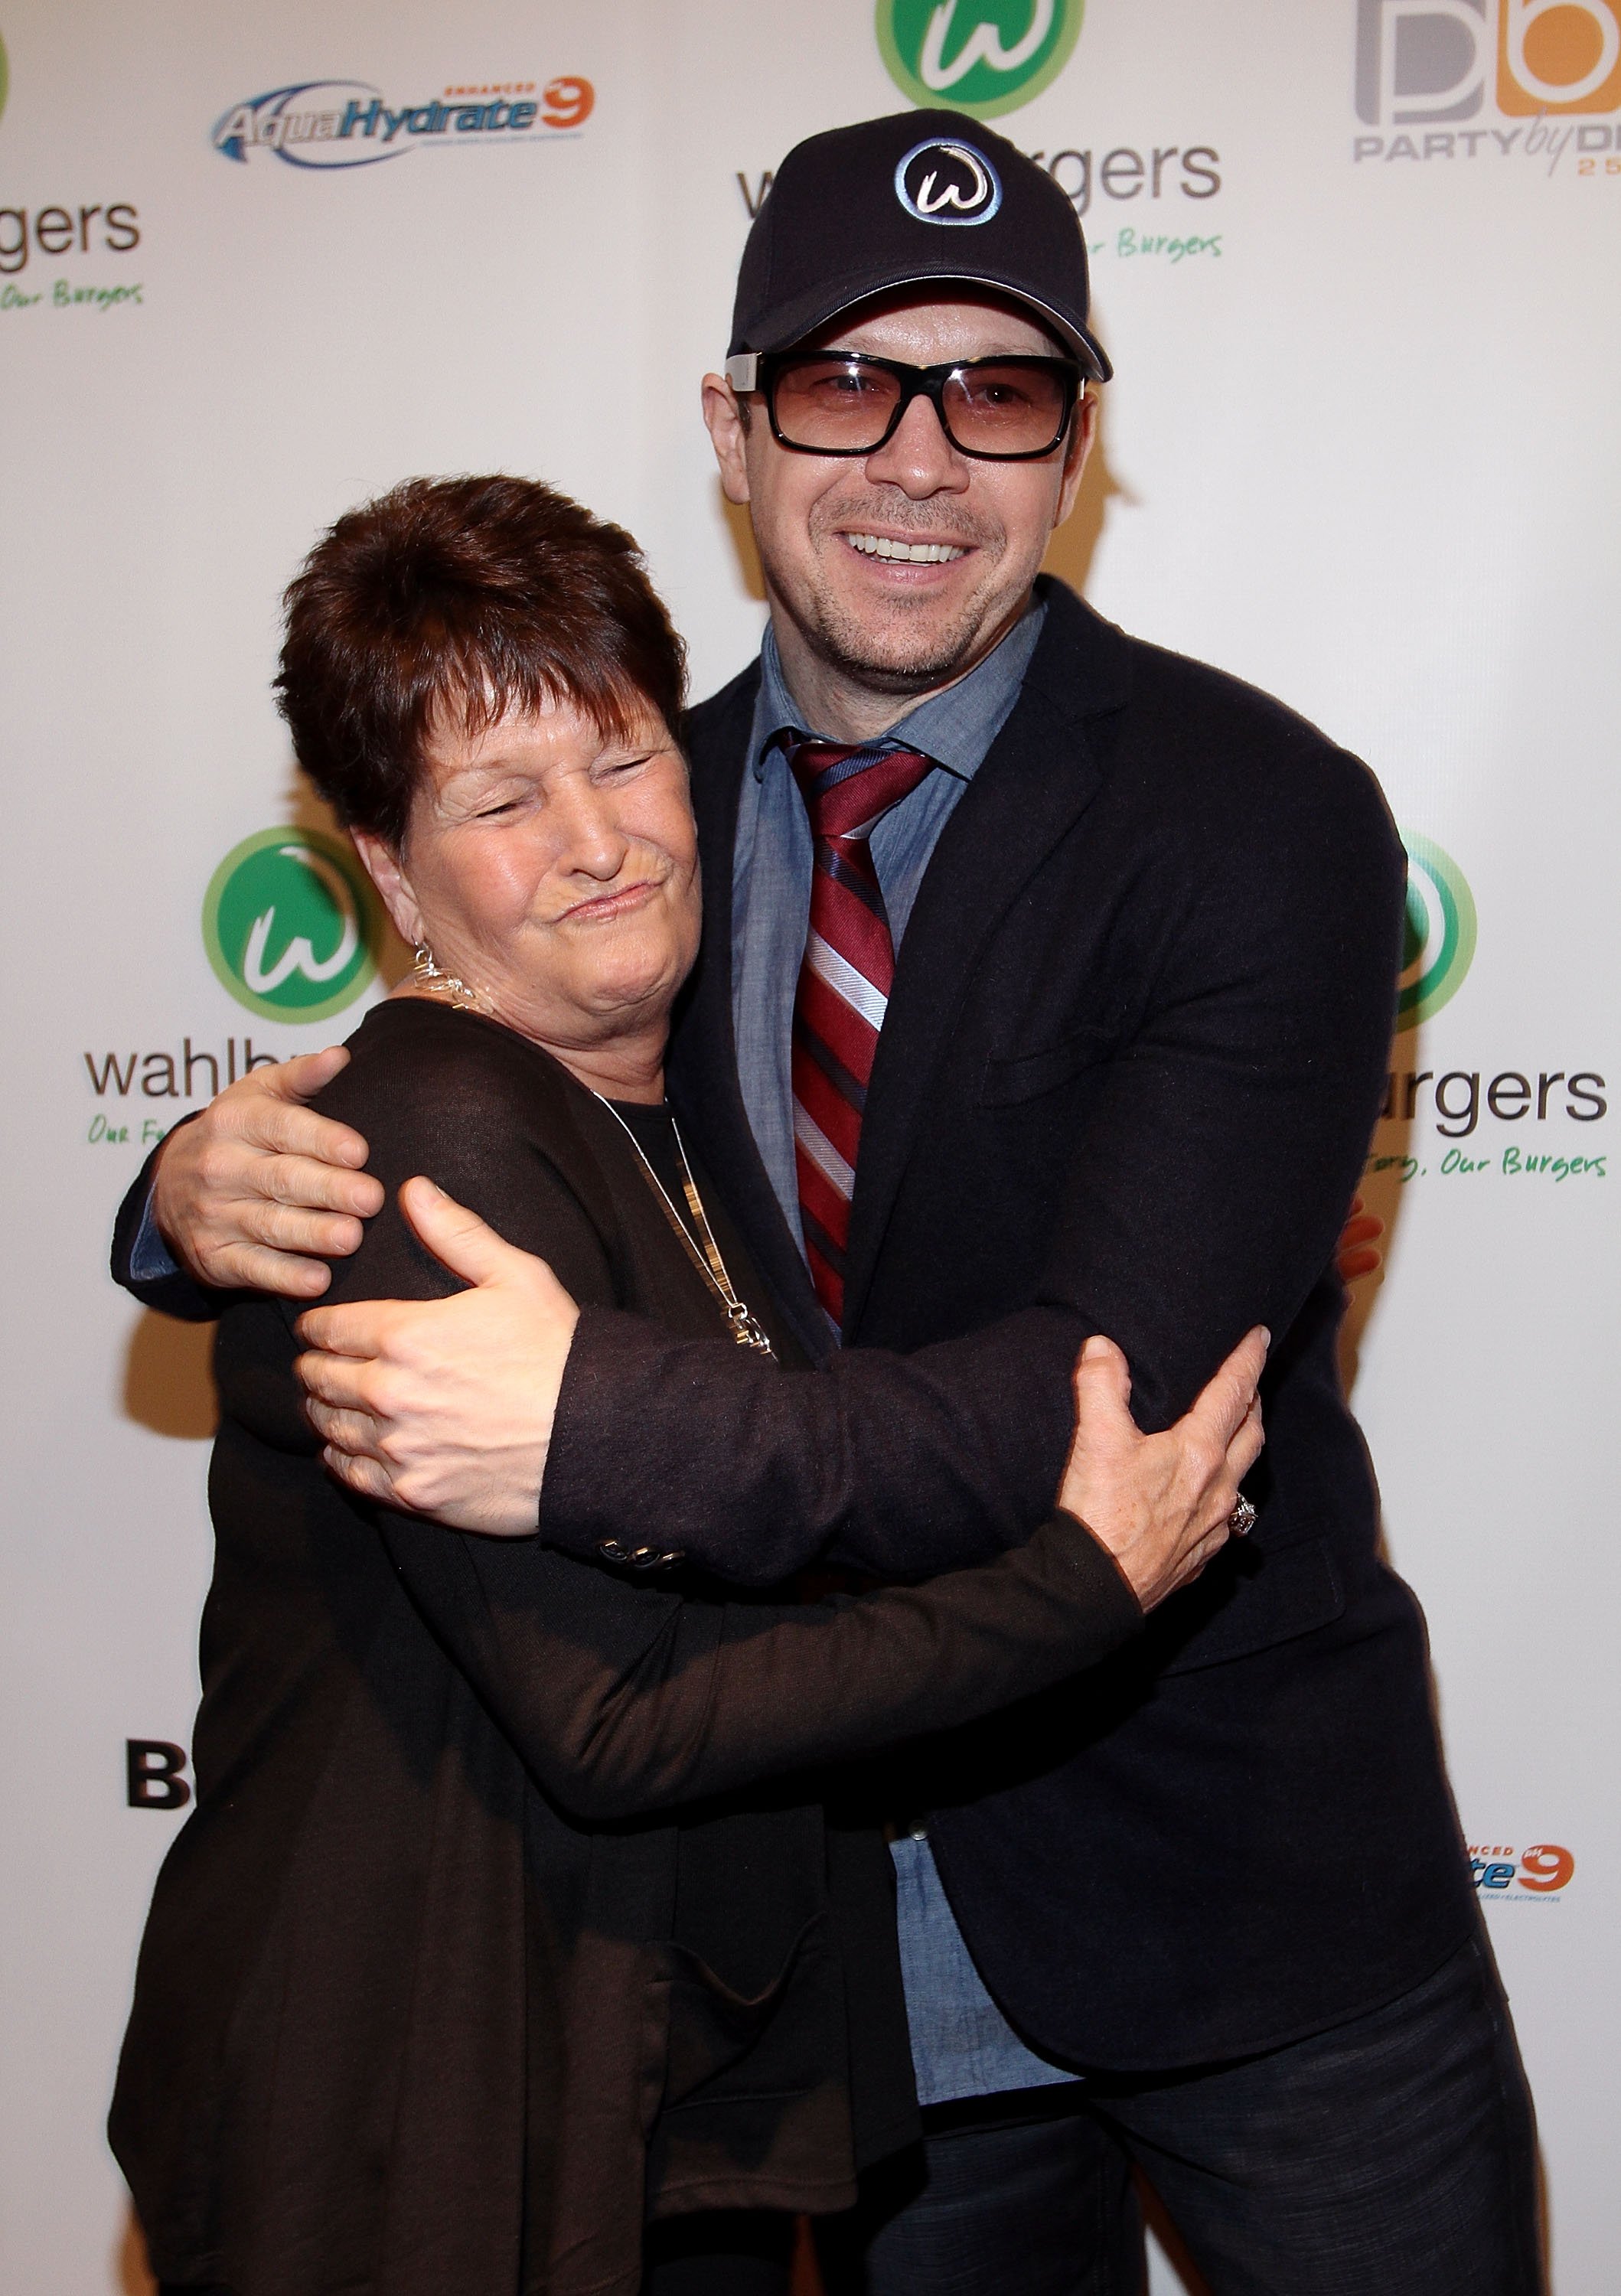 Alma Wahlberg and Donnie attend the grand opening of Wahlburgers on October 24, 2011 at the Hingham Shipyard in Boston, Massachusetts.| Photo: Getty Images